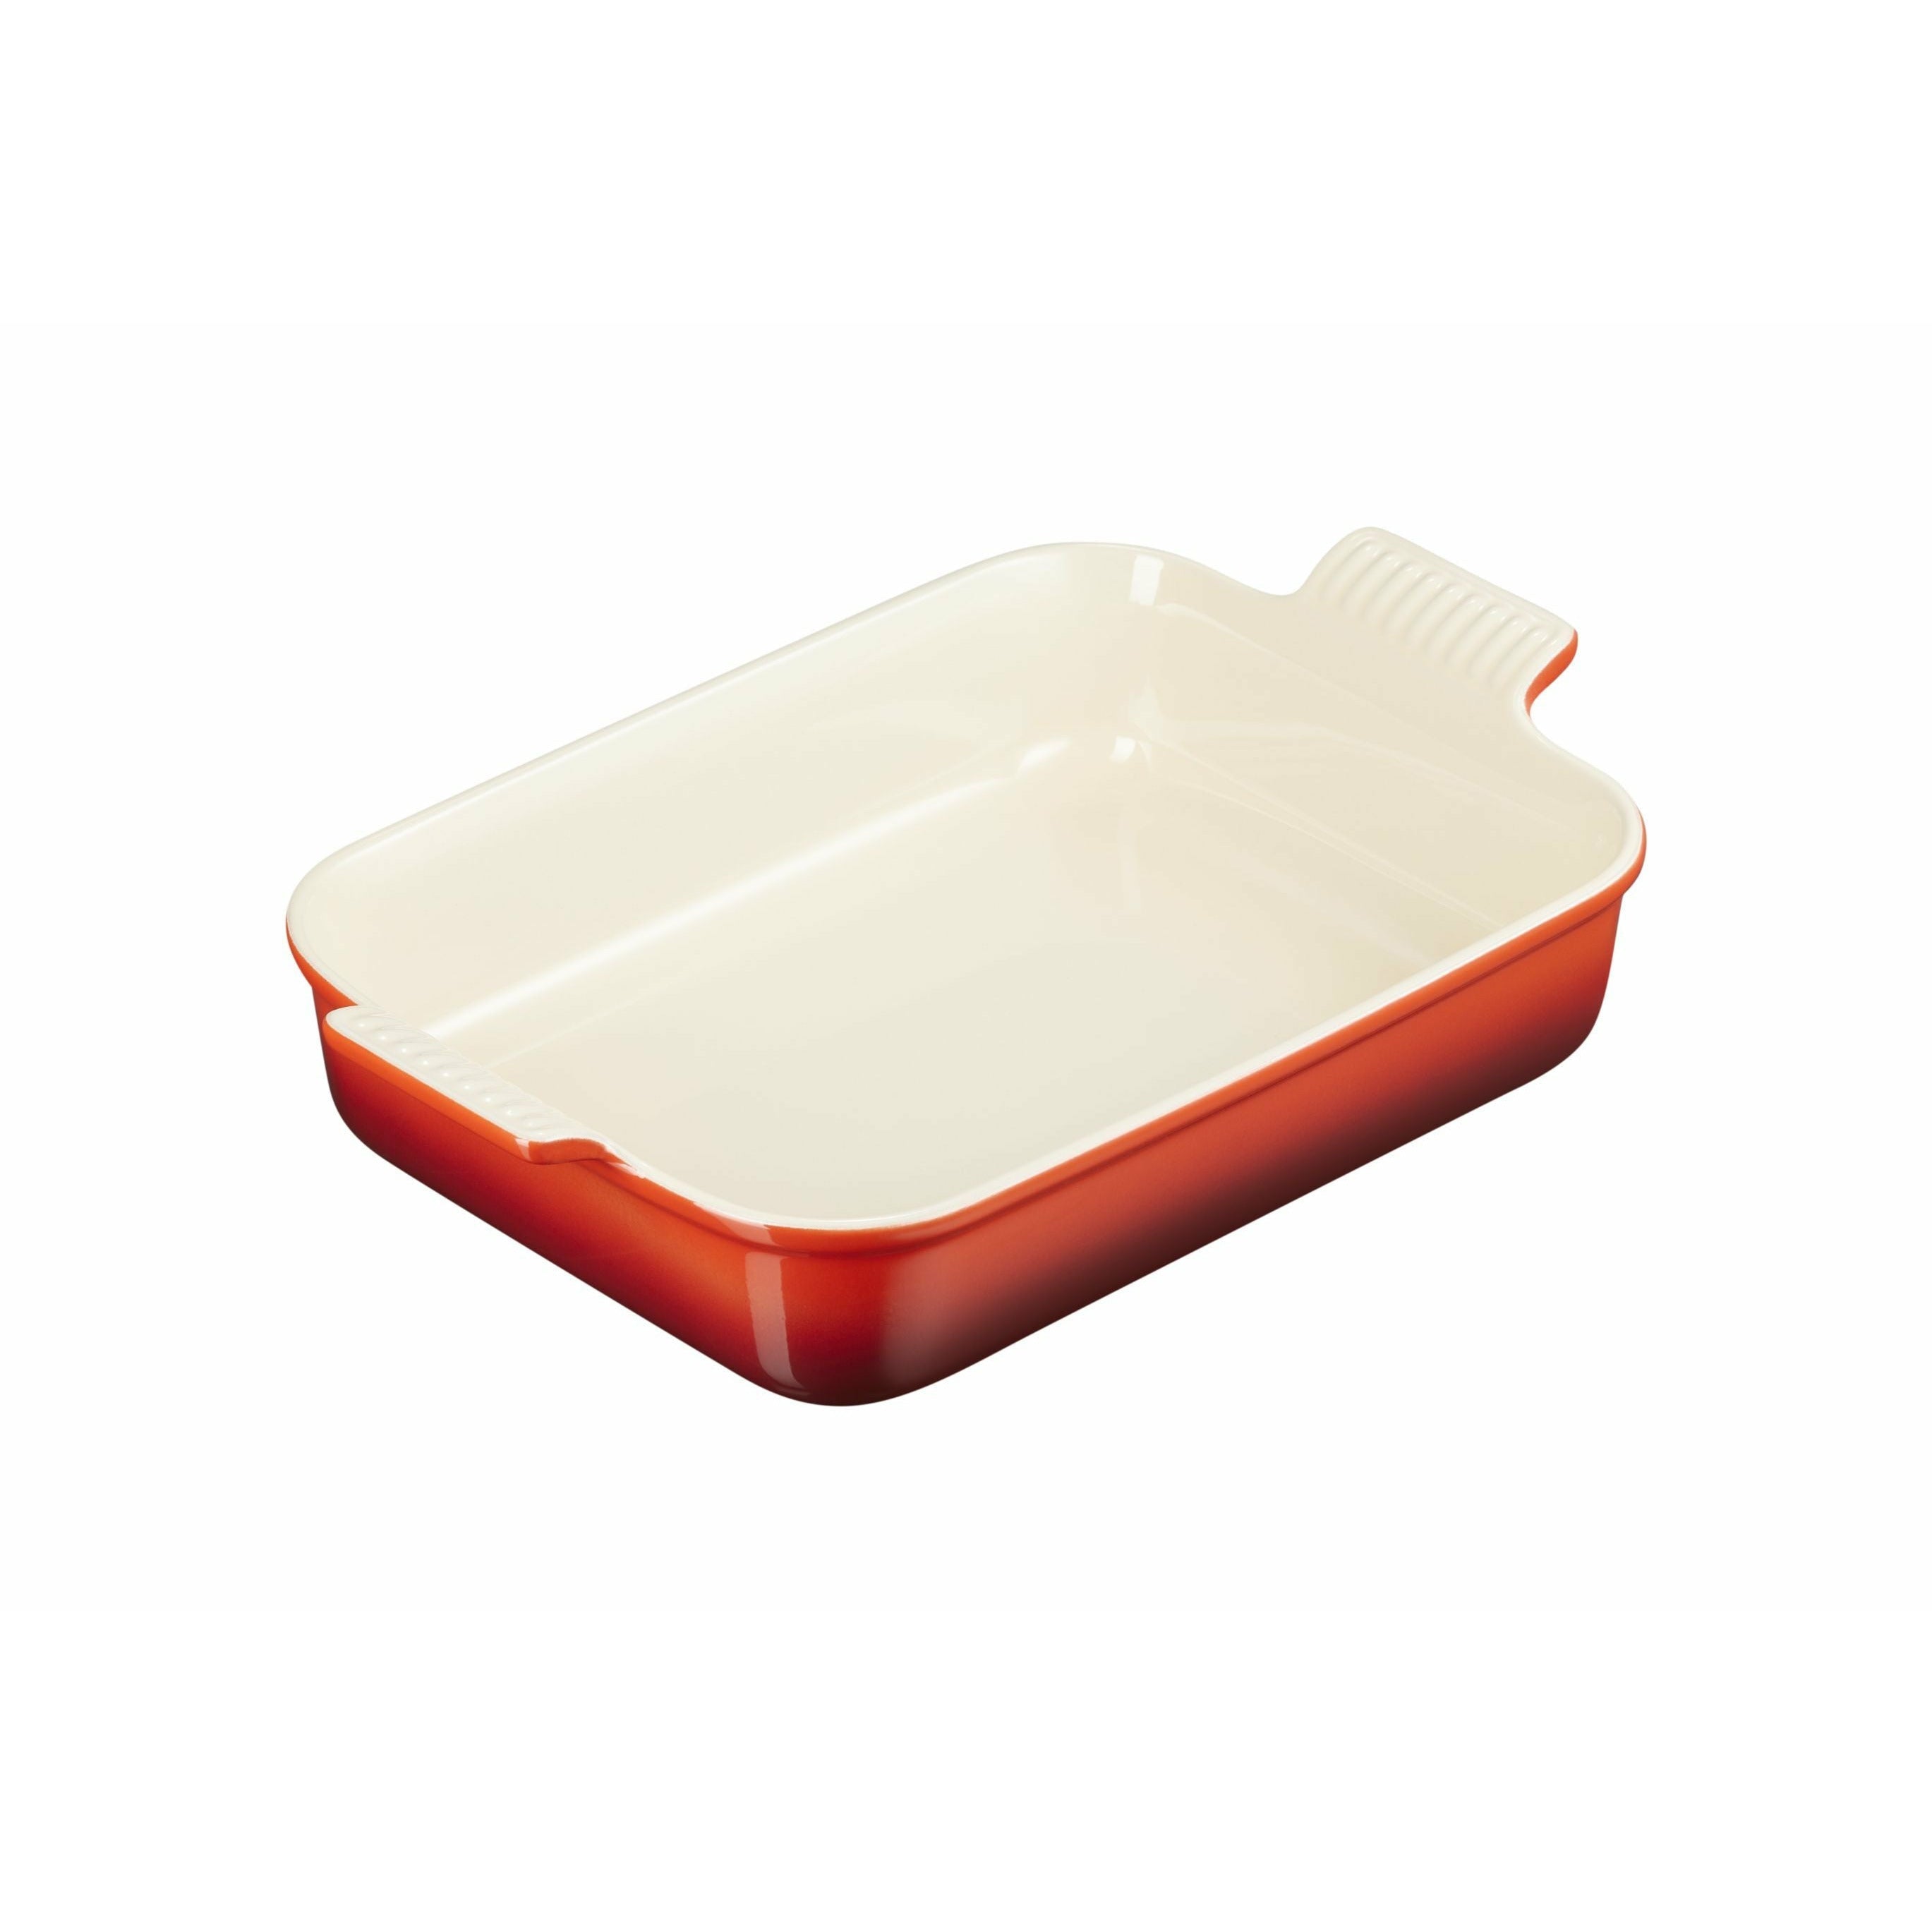 LE CREUSET RECTANGULAN COCH CAKING TRADITE 32 CM, ROSSO CHECHRY